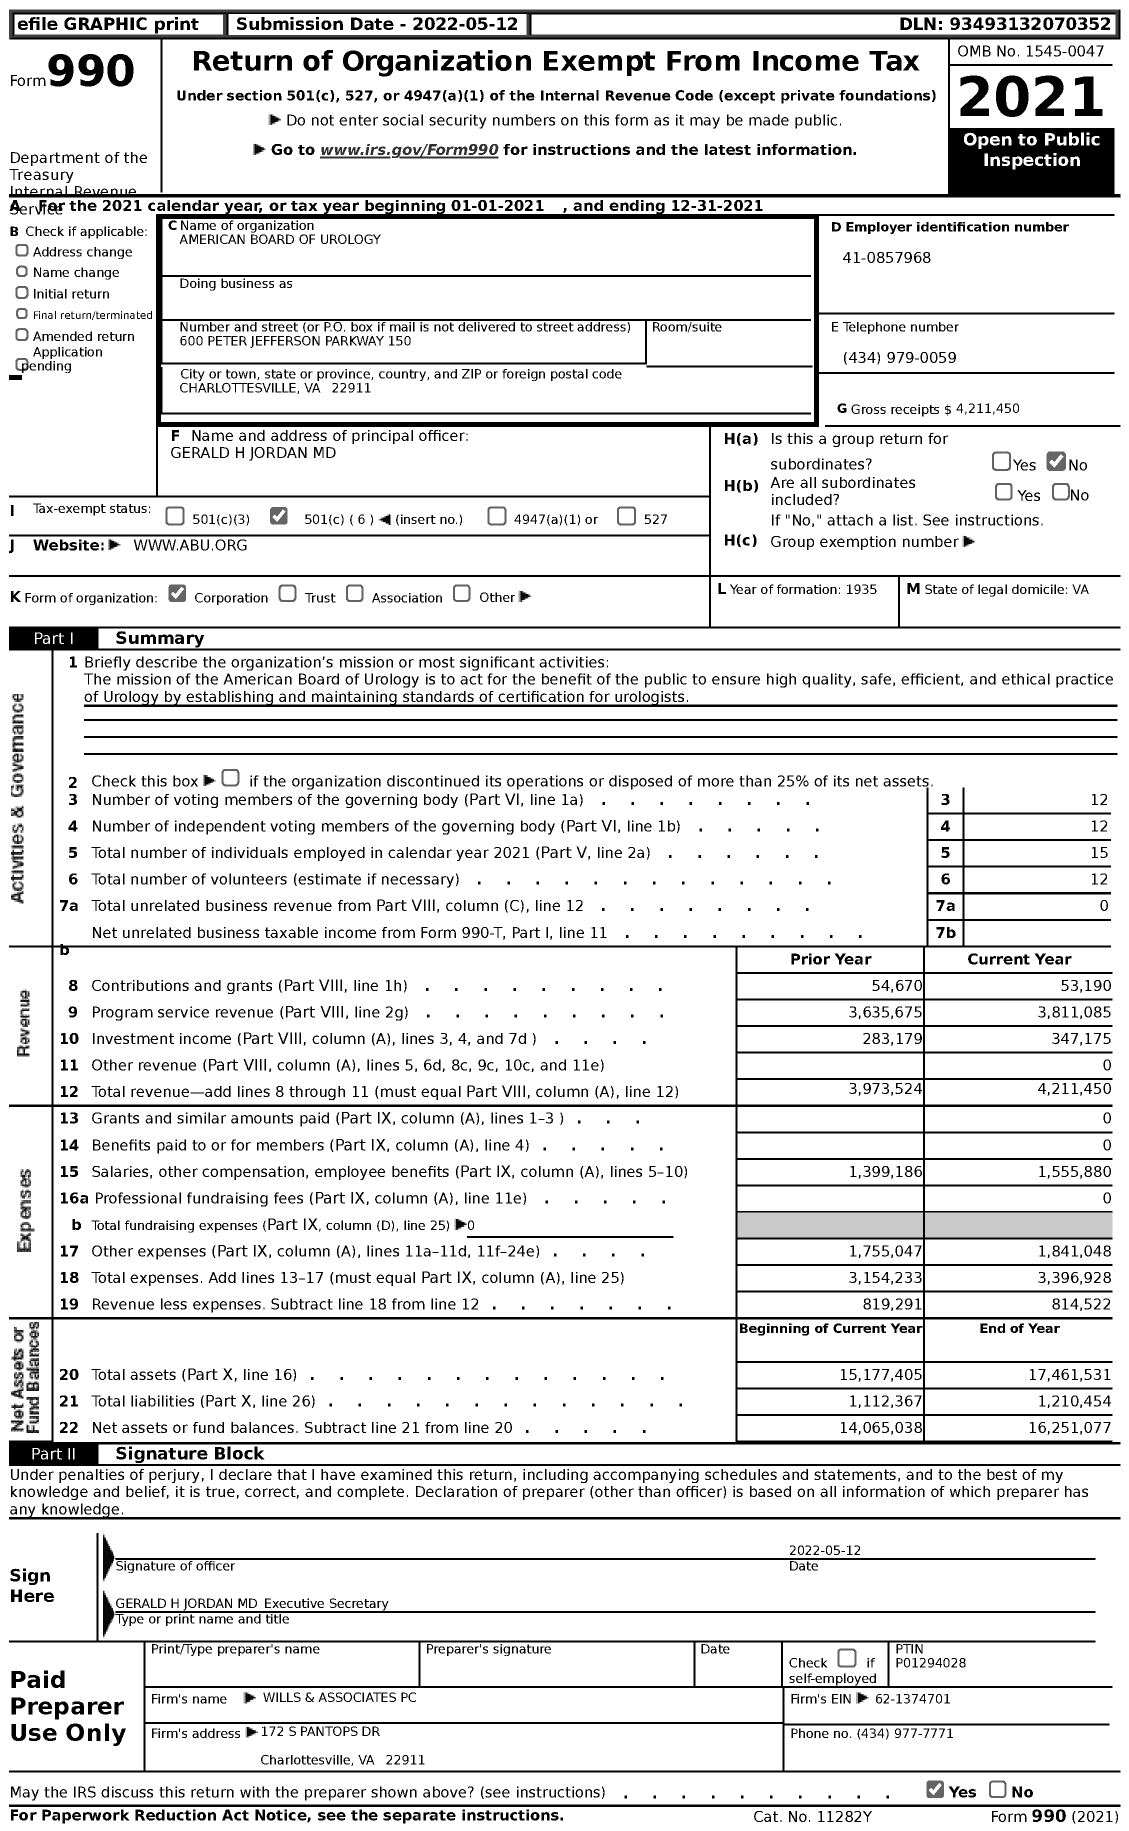 Image of first page of 2021 Form 990 for American Board of Urology (ABU)